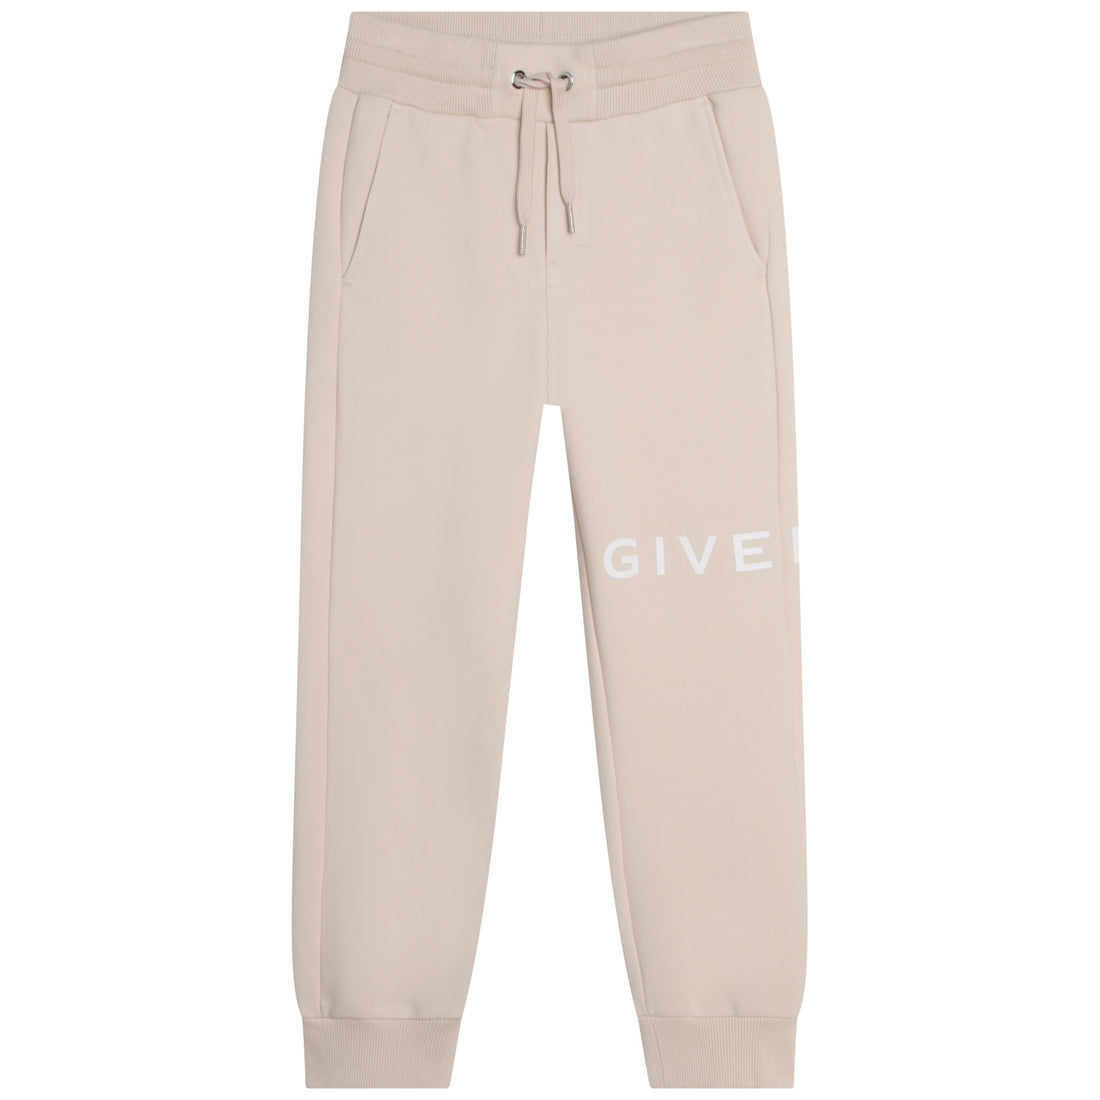 Givenchy Jogging Bottoms Style: H24202